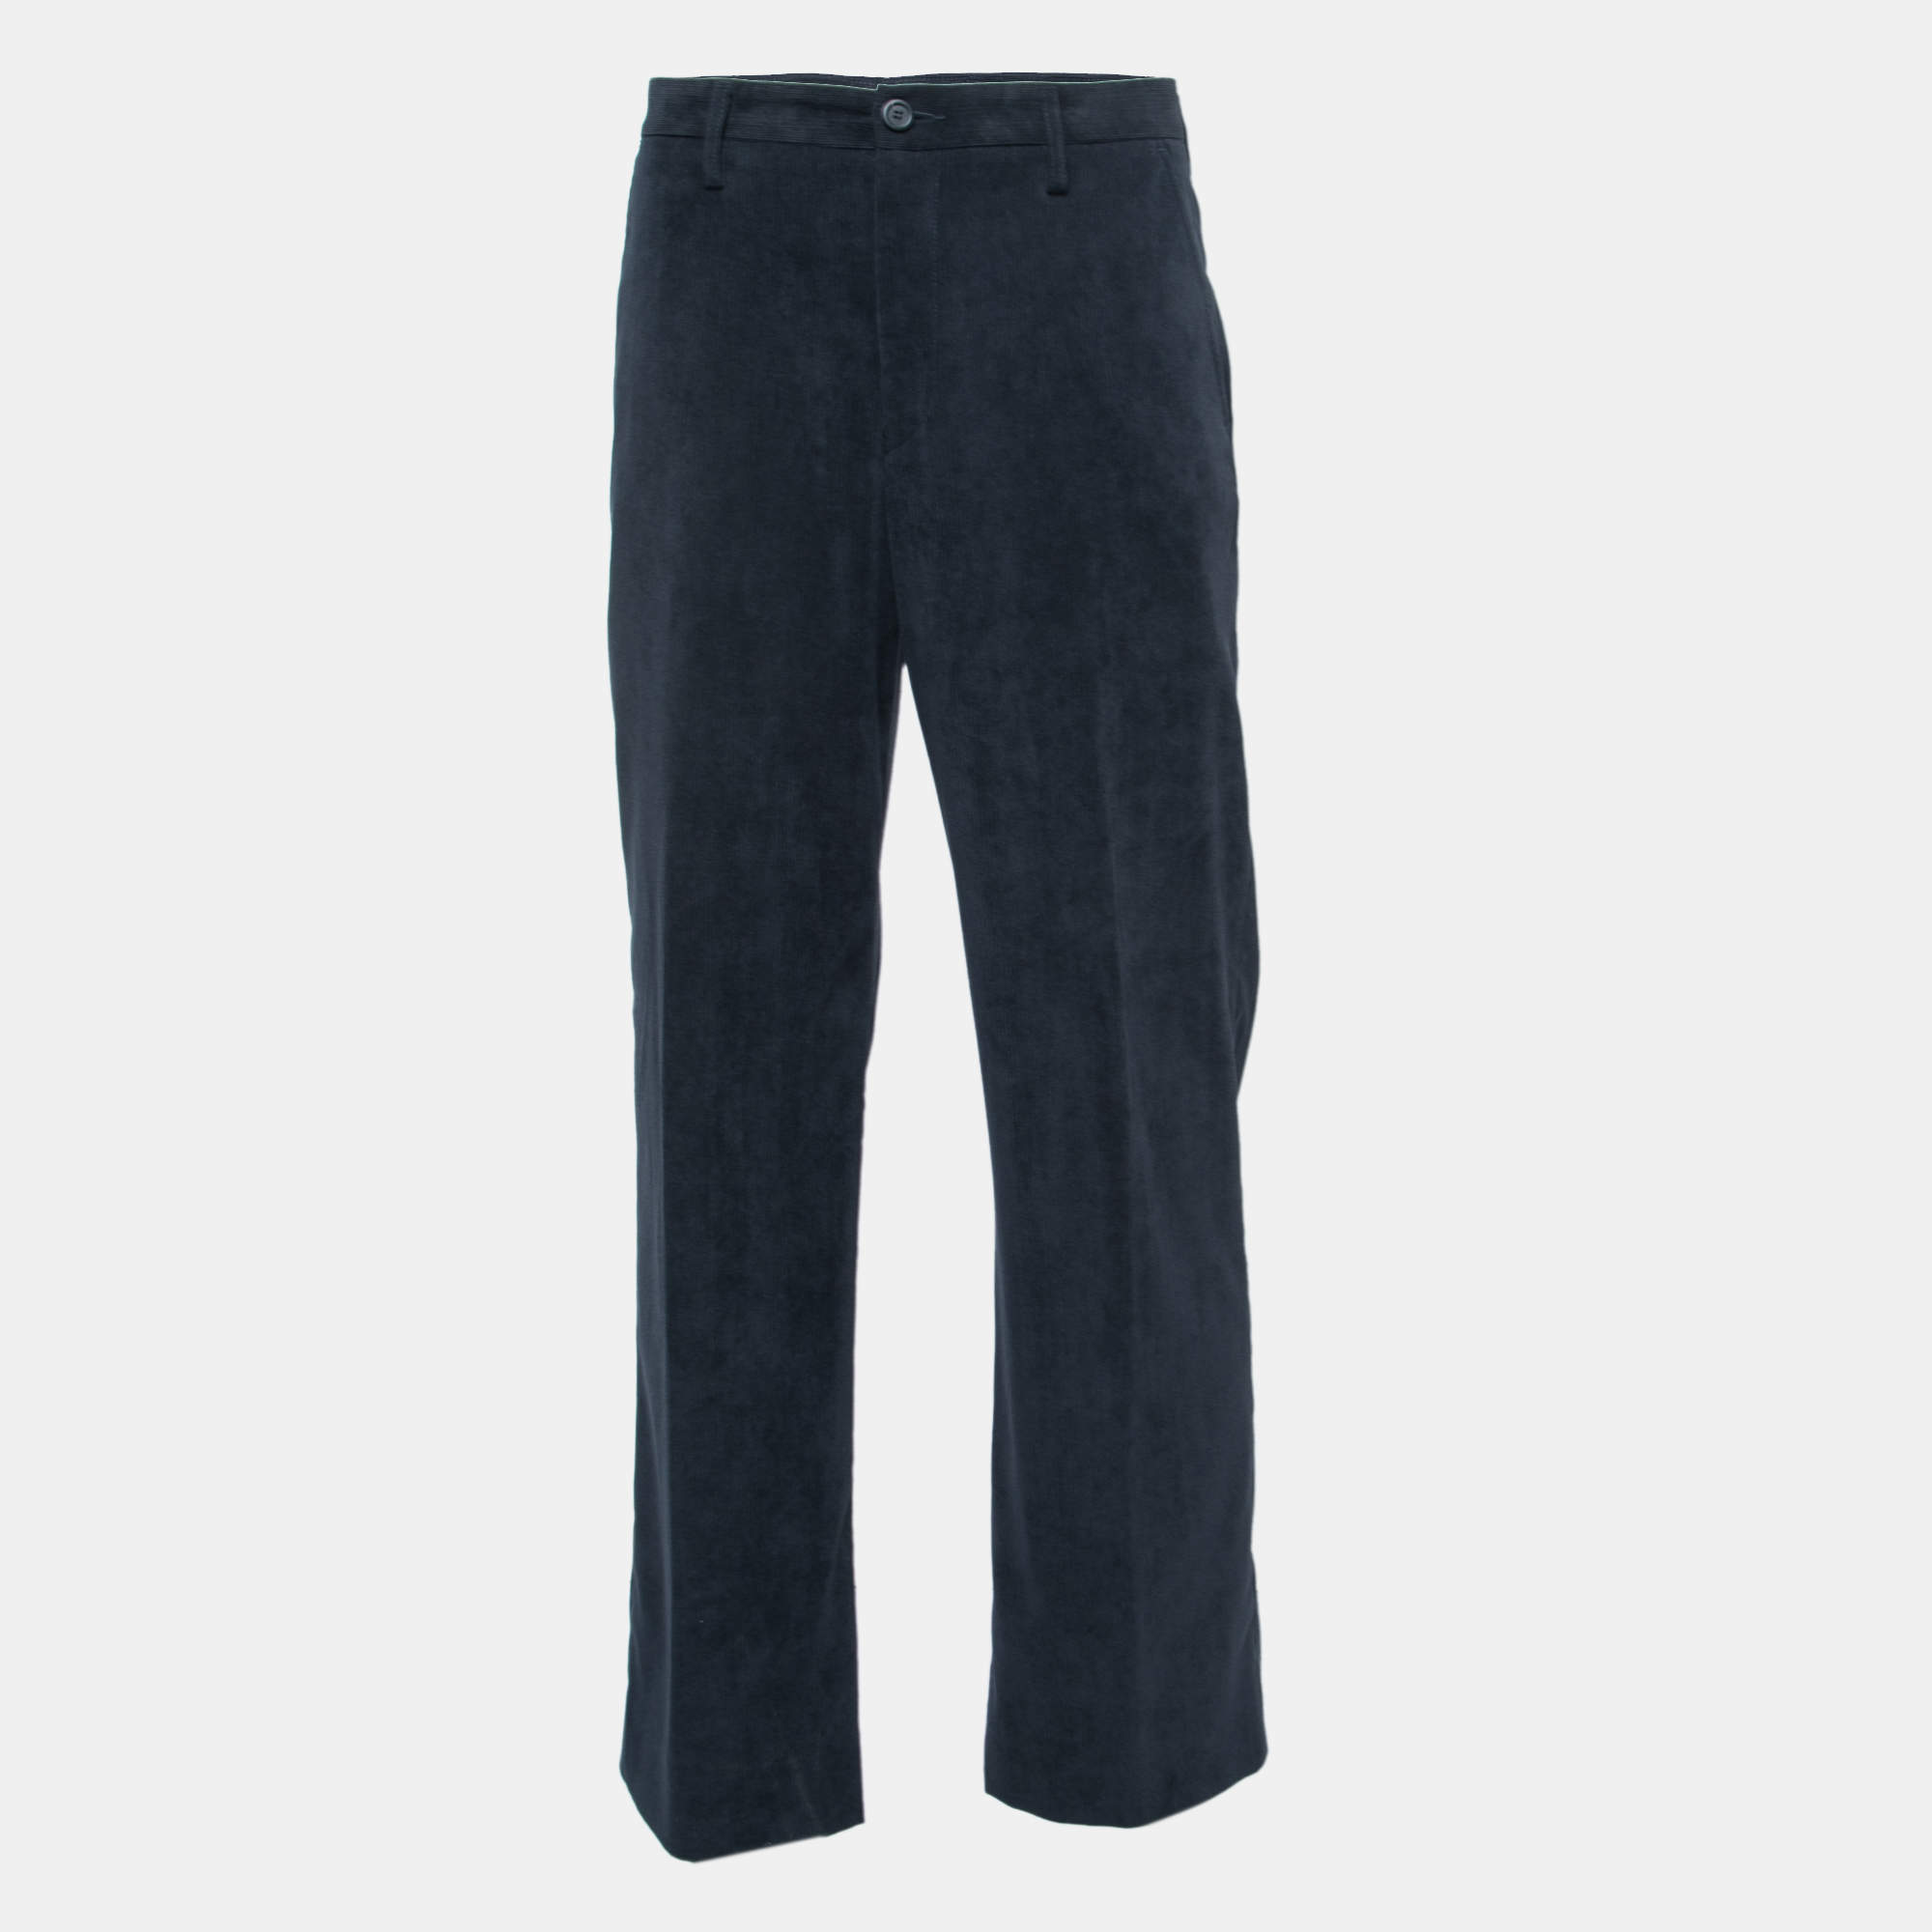 Stretch Cobalt Blue Corduroy Trousers - 21 Wales : Made To Measure Custom  Jeans For Men & Women, MakeYourOwnJeans®